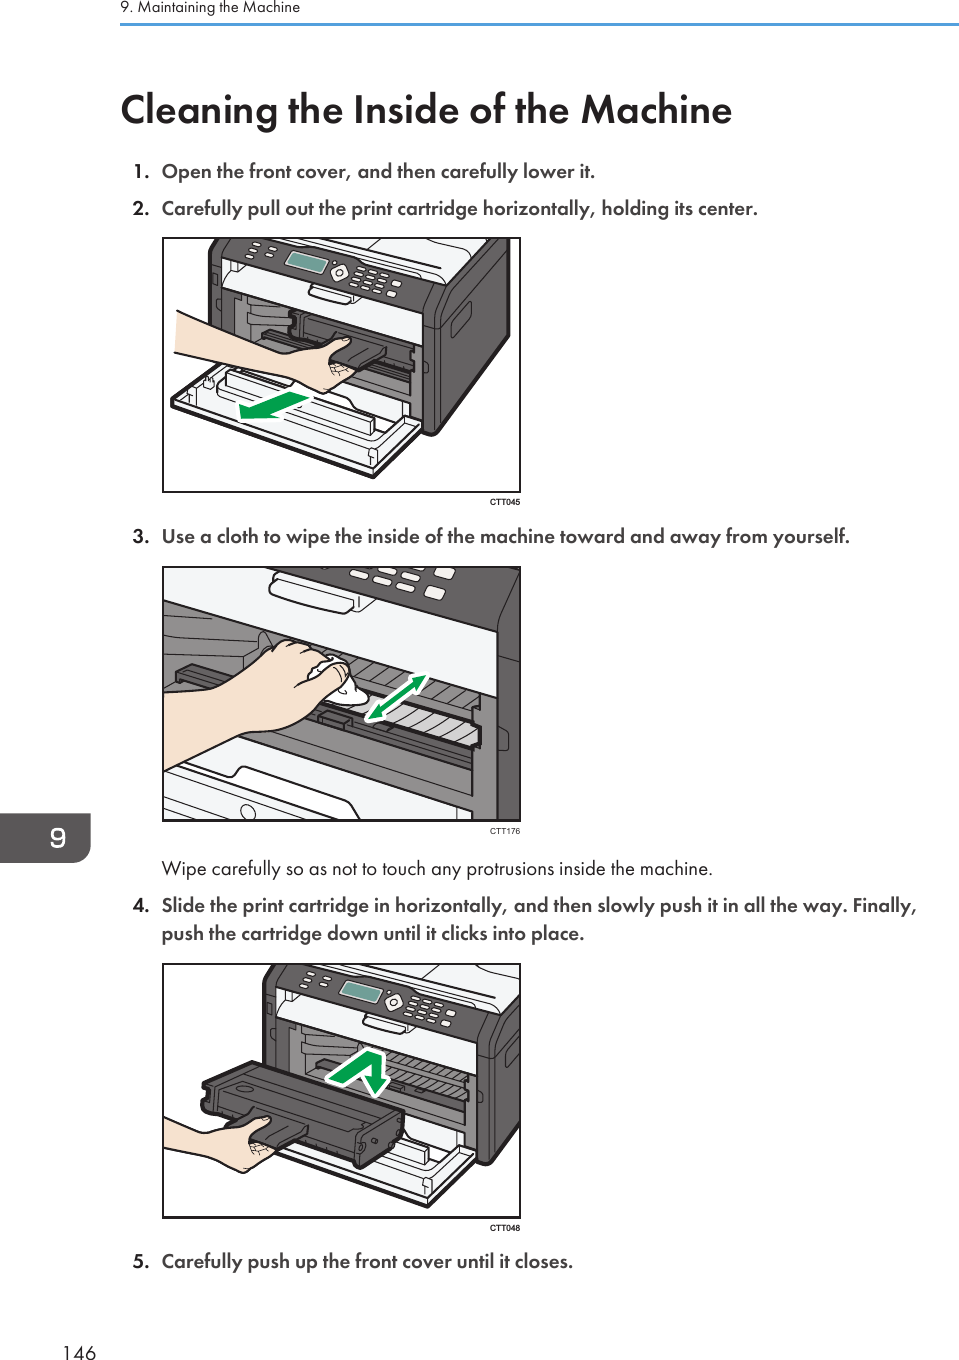 Cleaning the Inside of the Machine1. Open the front cover, and then carefully lower it.2. Carefully pull out the print cartridge horizontally, holding its center.CTT0453. Use a cloth to wipe the inside of the machine toward and away from yourself.CTT176Wipe carefully so as not to touch any protrusions inside the machine.4. Slide the print cartridge in horizontally, and then slowly push it in all the way. Finally,push the cartridge down until it clicks into place.CTT0485. Carefully push up the front cover until it closes.9. Maintaining the Machine146